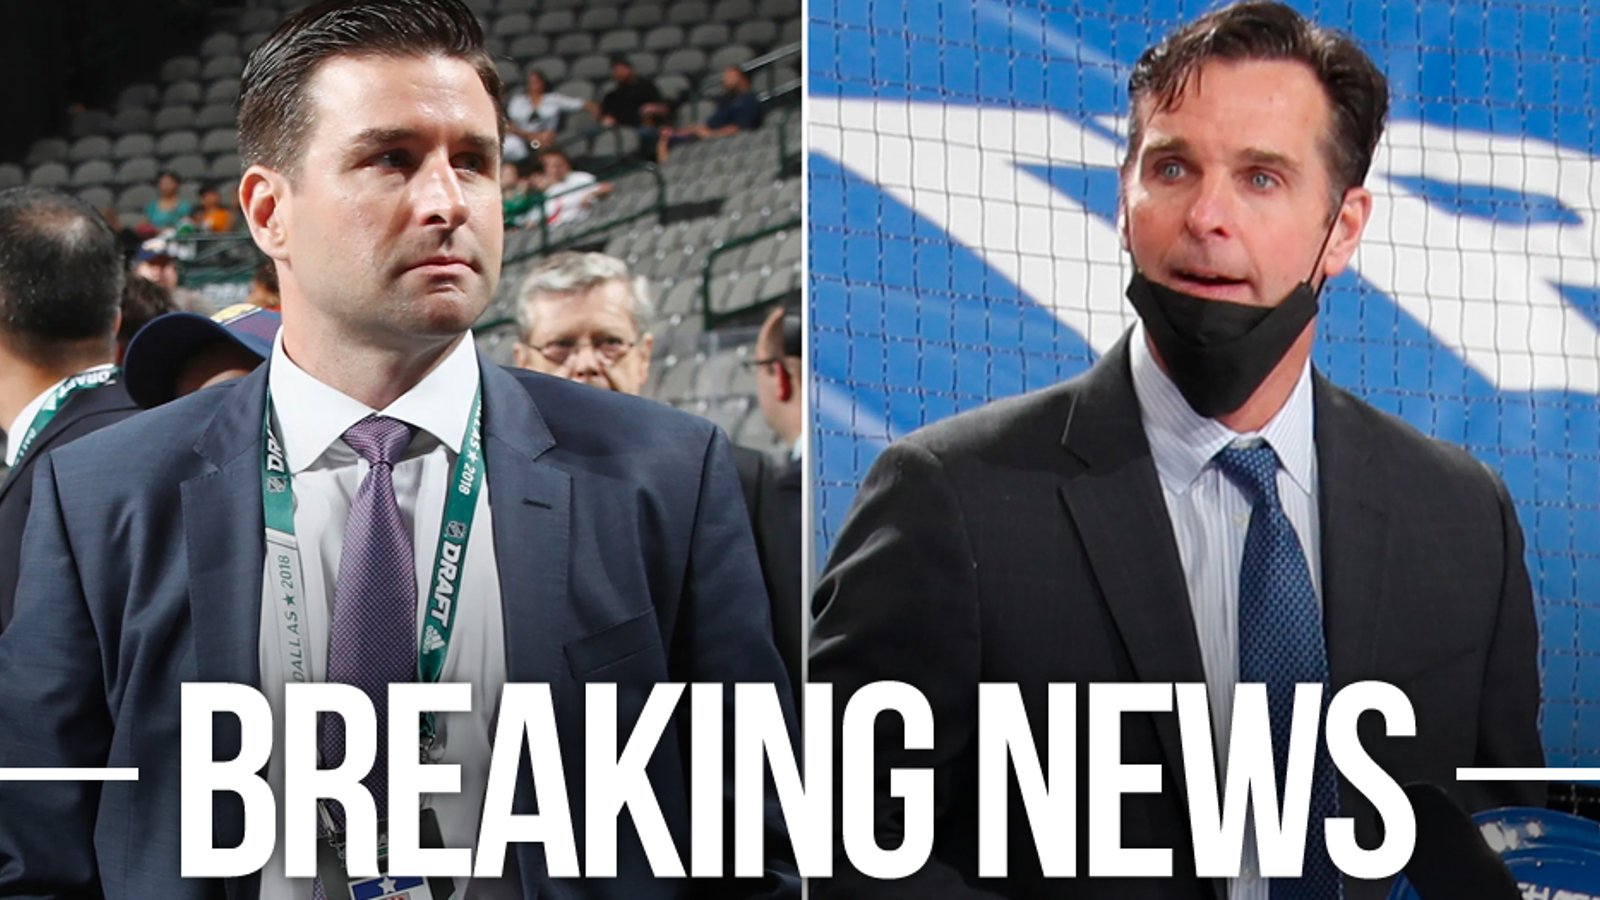 Rangers continue to clear house, fire Quinn and entire coaching staff